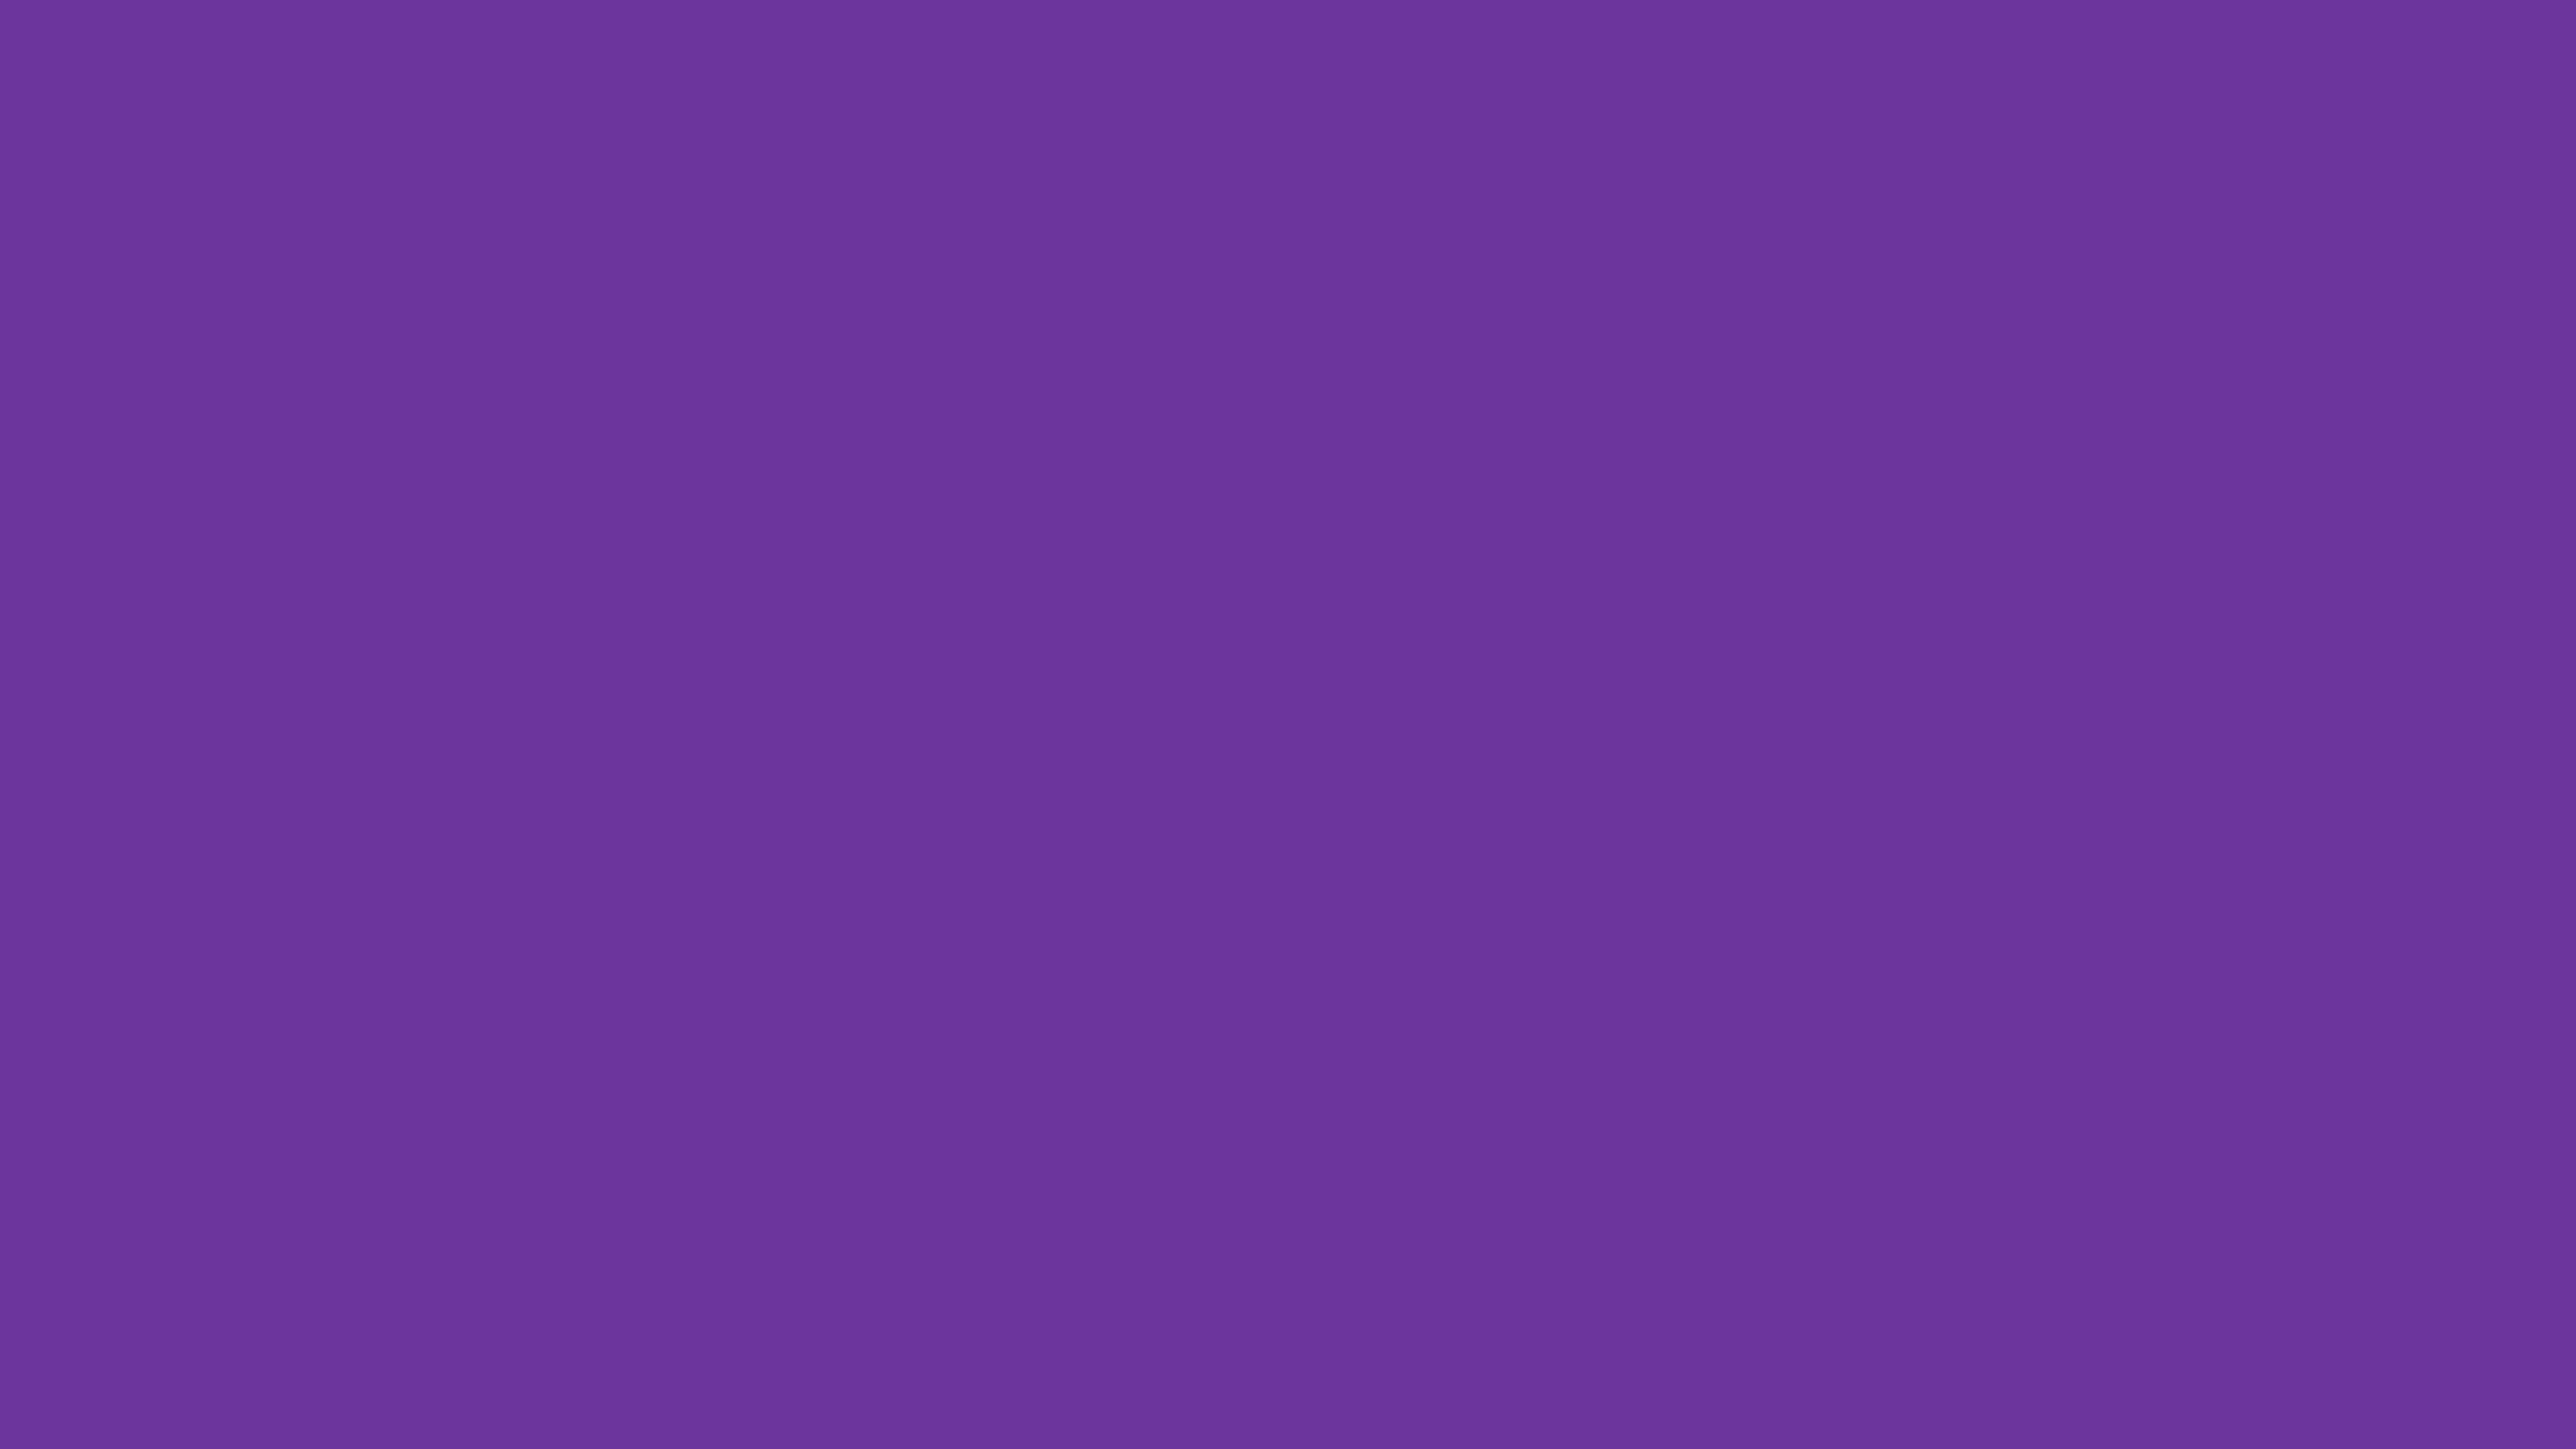 7680x4320 Purple Heart Solid Color Background